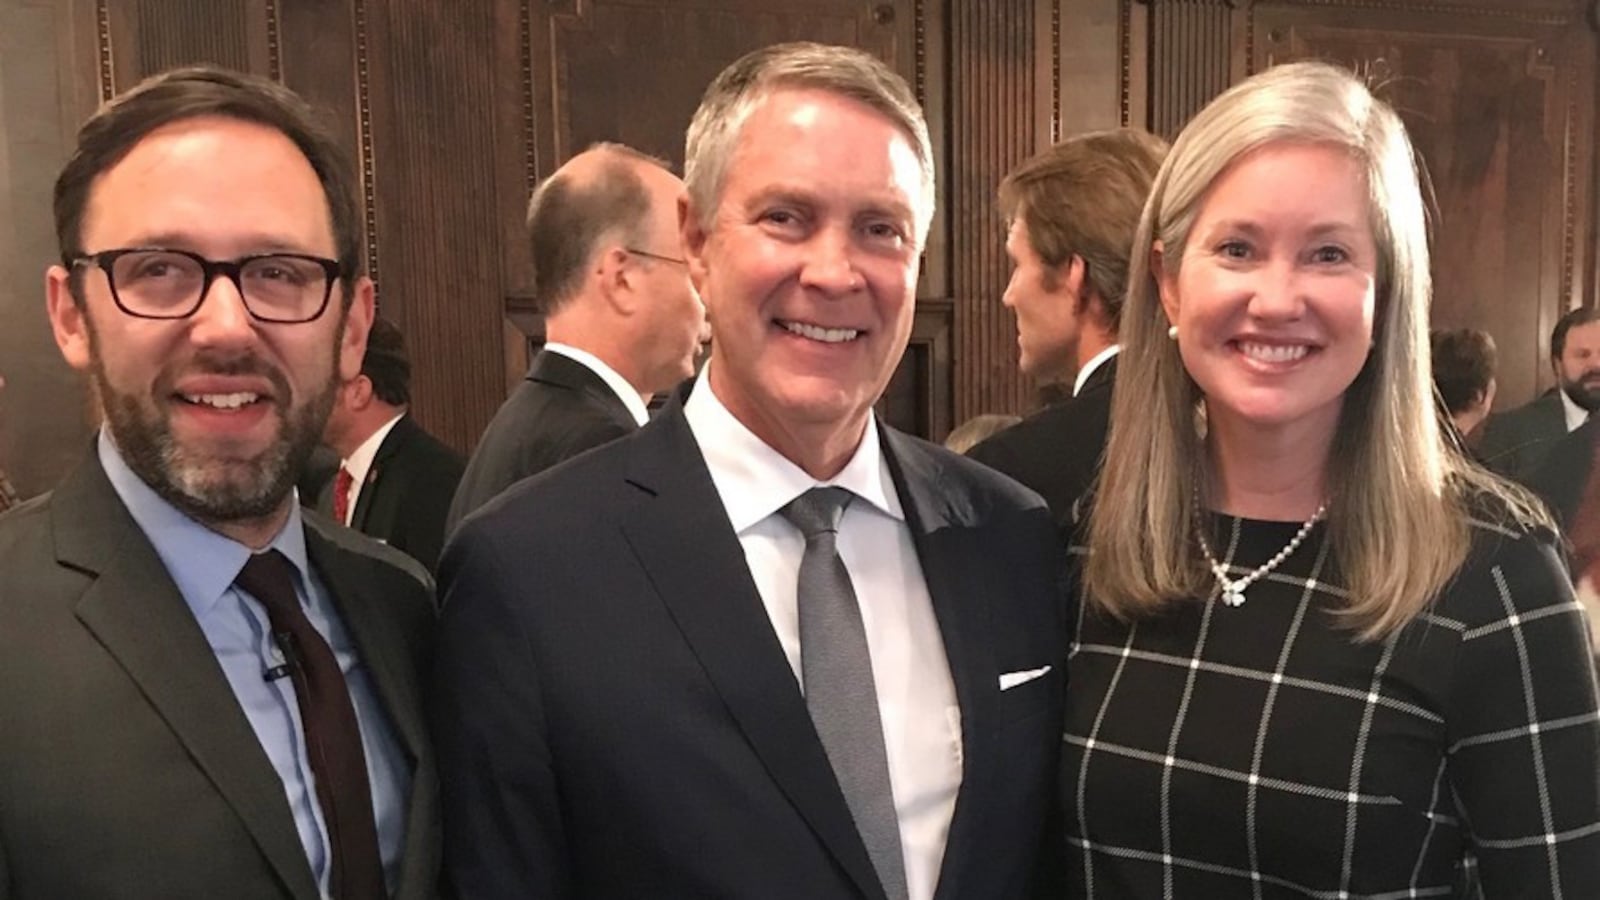 Former U.S. Senate Majority Leader Bill Frist is flanked by David Mansouri and Jamie Woodson. Frist founded the State Collaborative on Reforming Education in 2009, and Woodson has since 2011 served as its CEO, a role that Mansouri will assume in 2019. (Photo courtesy of SCORE)